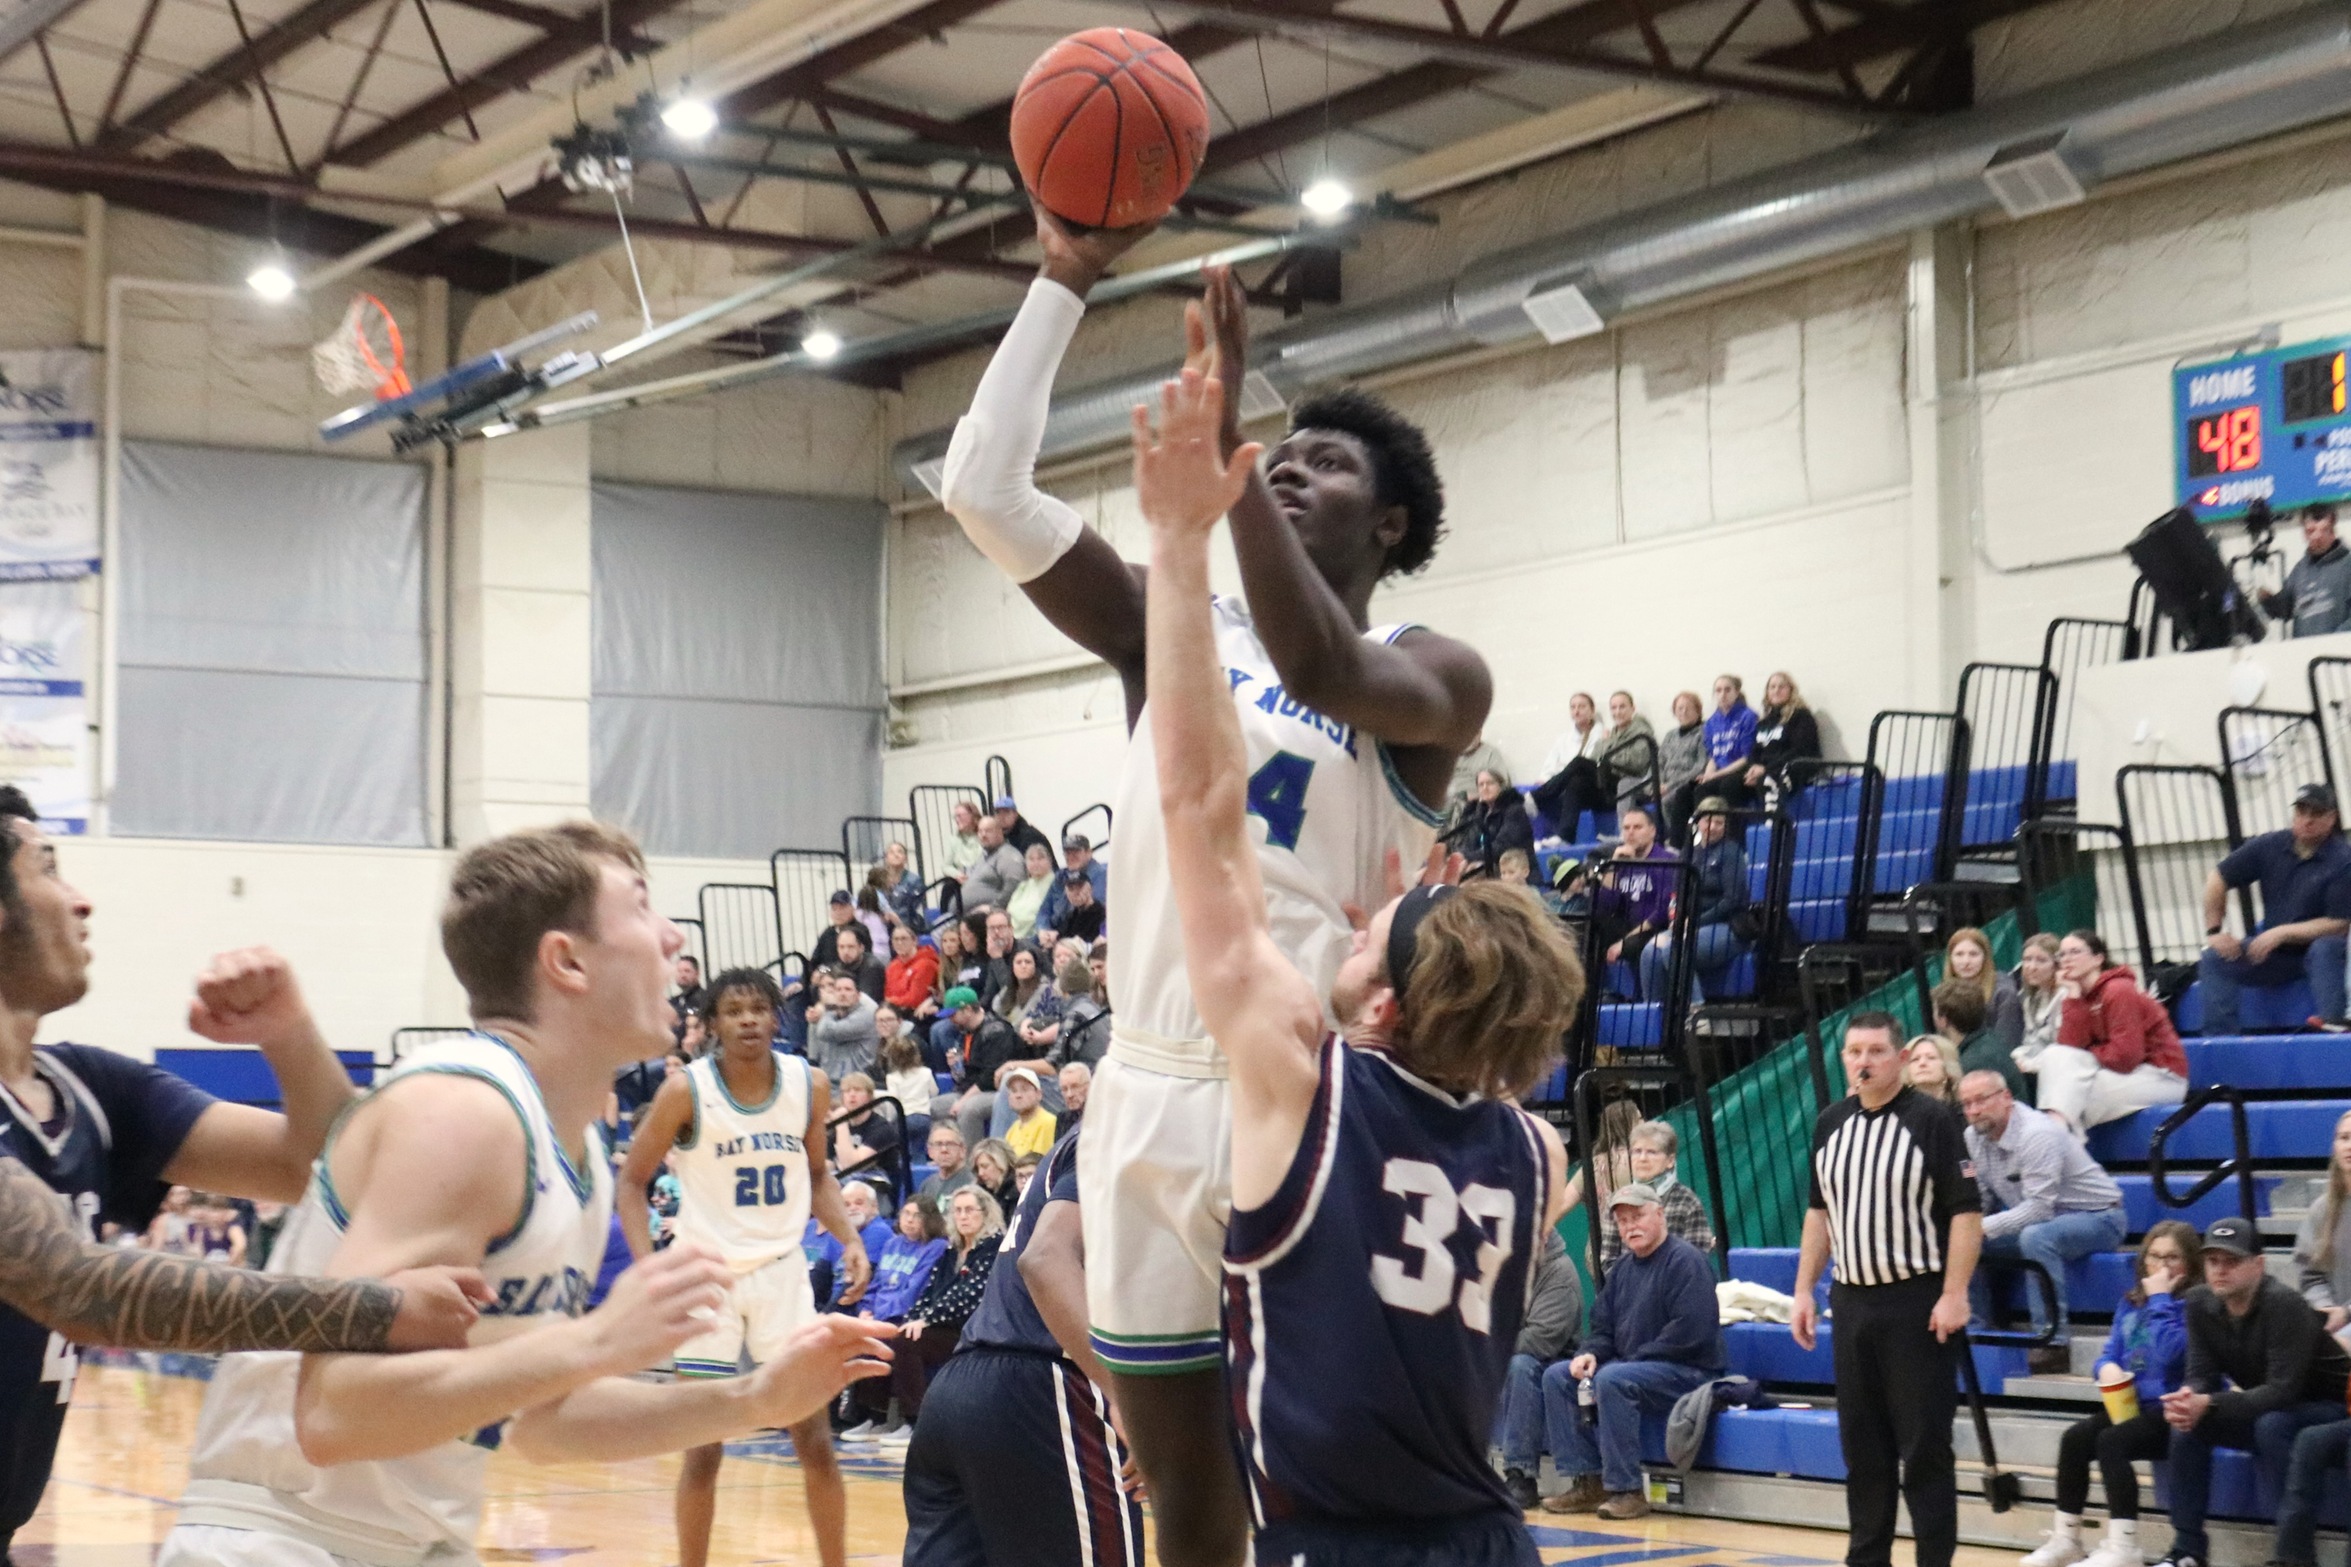 Joshua Ofori jumps in the air, about to release a shot in the lane.  A defender has a hand stretched up, Ryan Sweeney looks on besides Joshua.